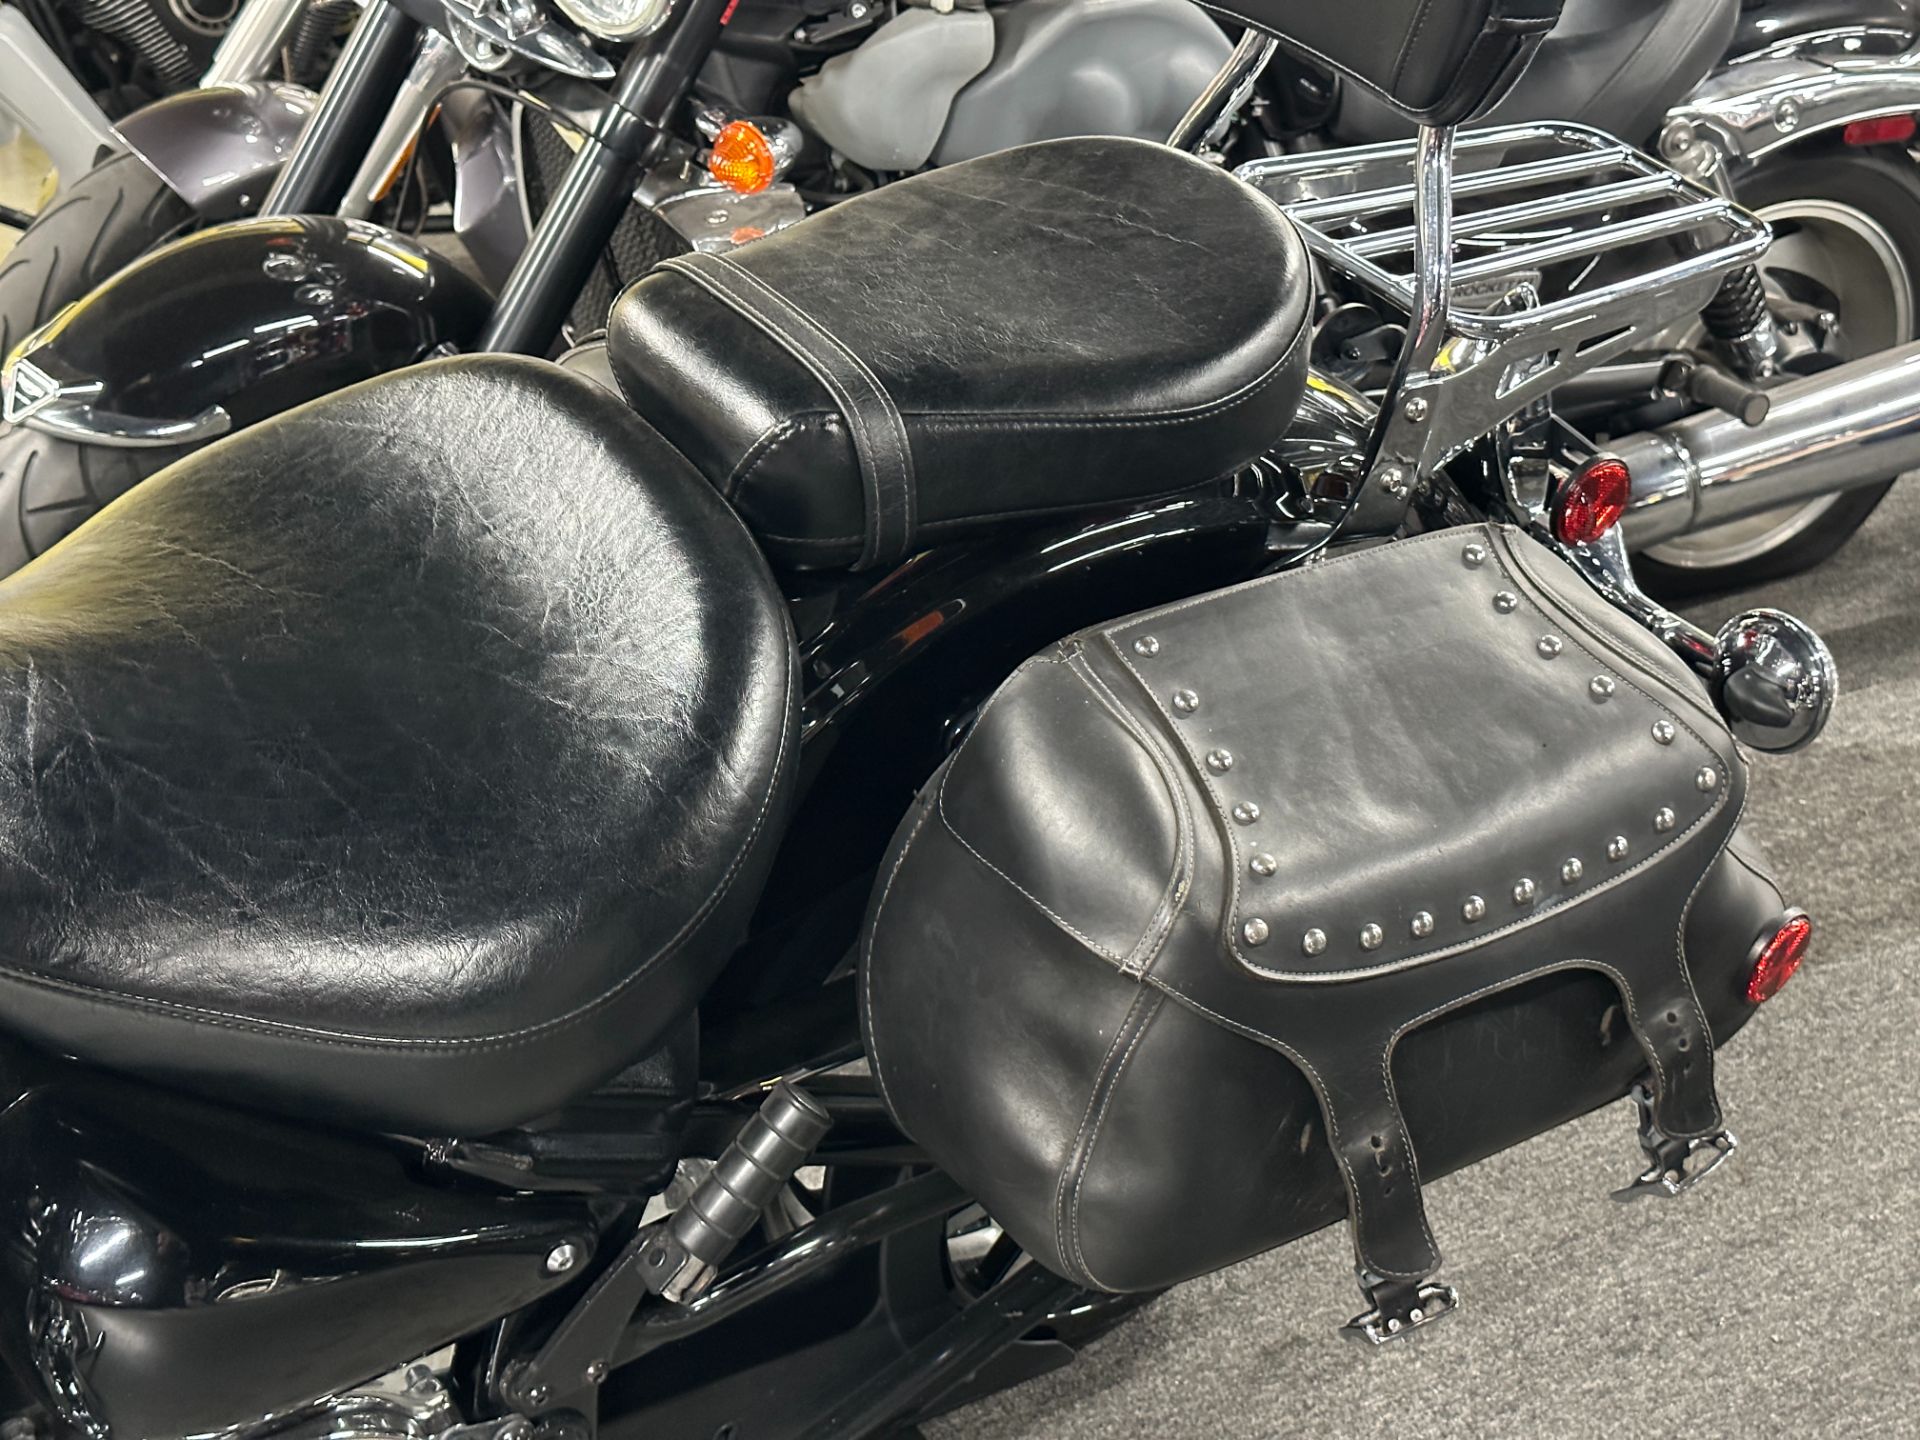 2012 Yamaha Road Star S in Oakdale, New York - Photo 4